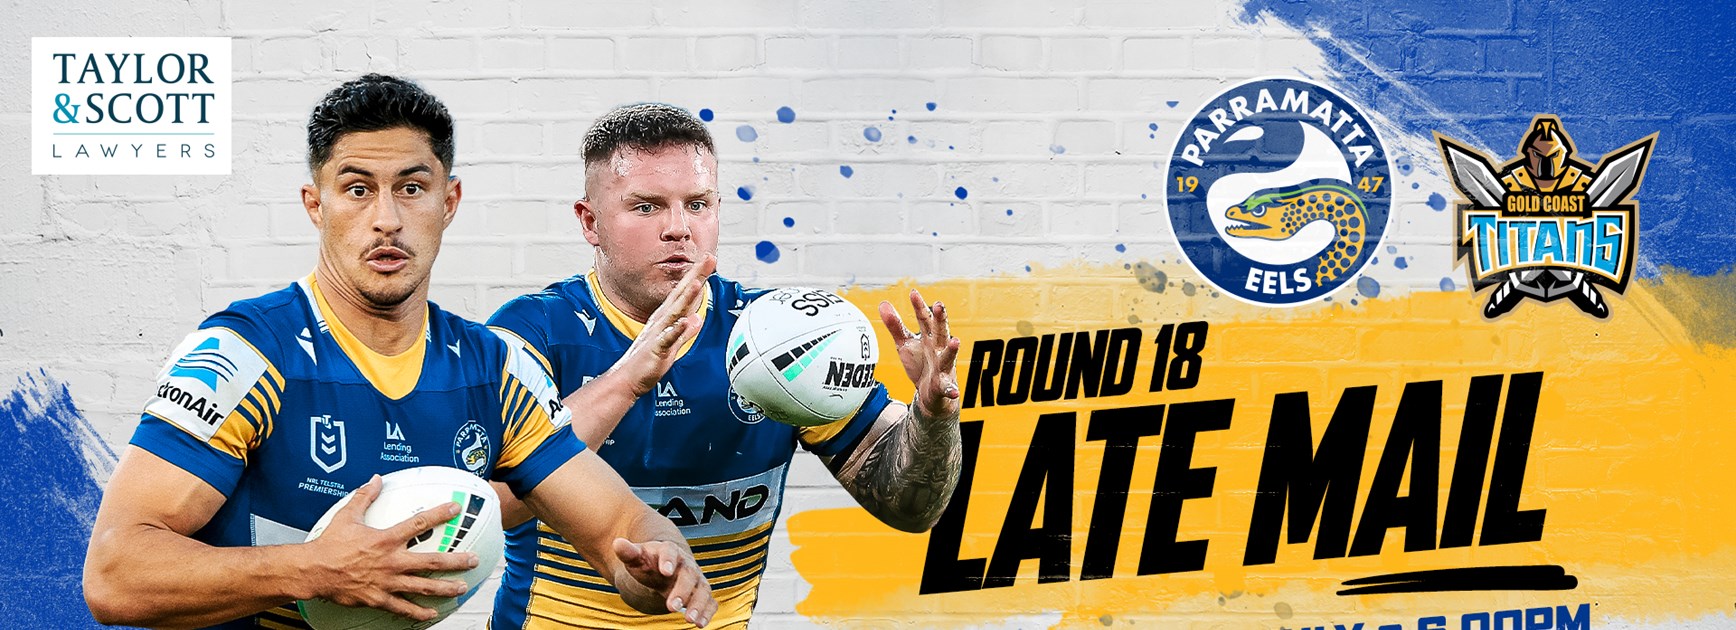 Late Mail - Titans v Eels, Round 18